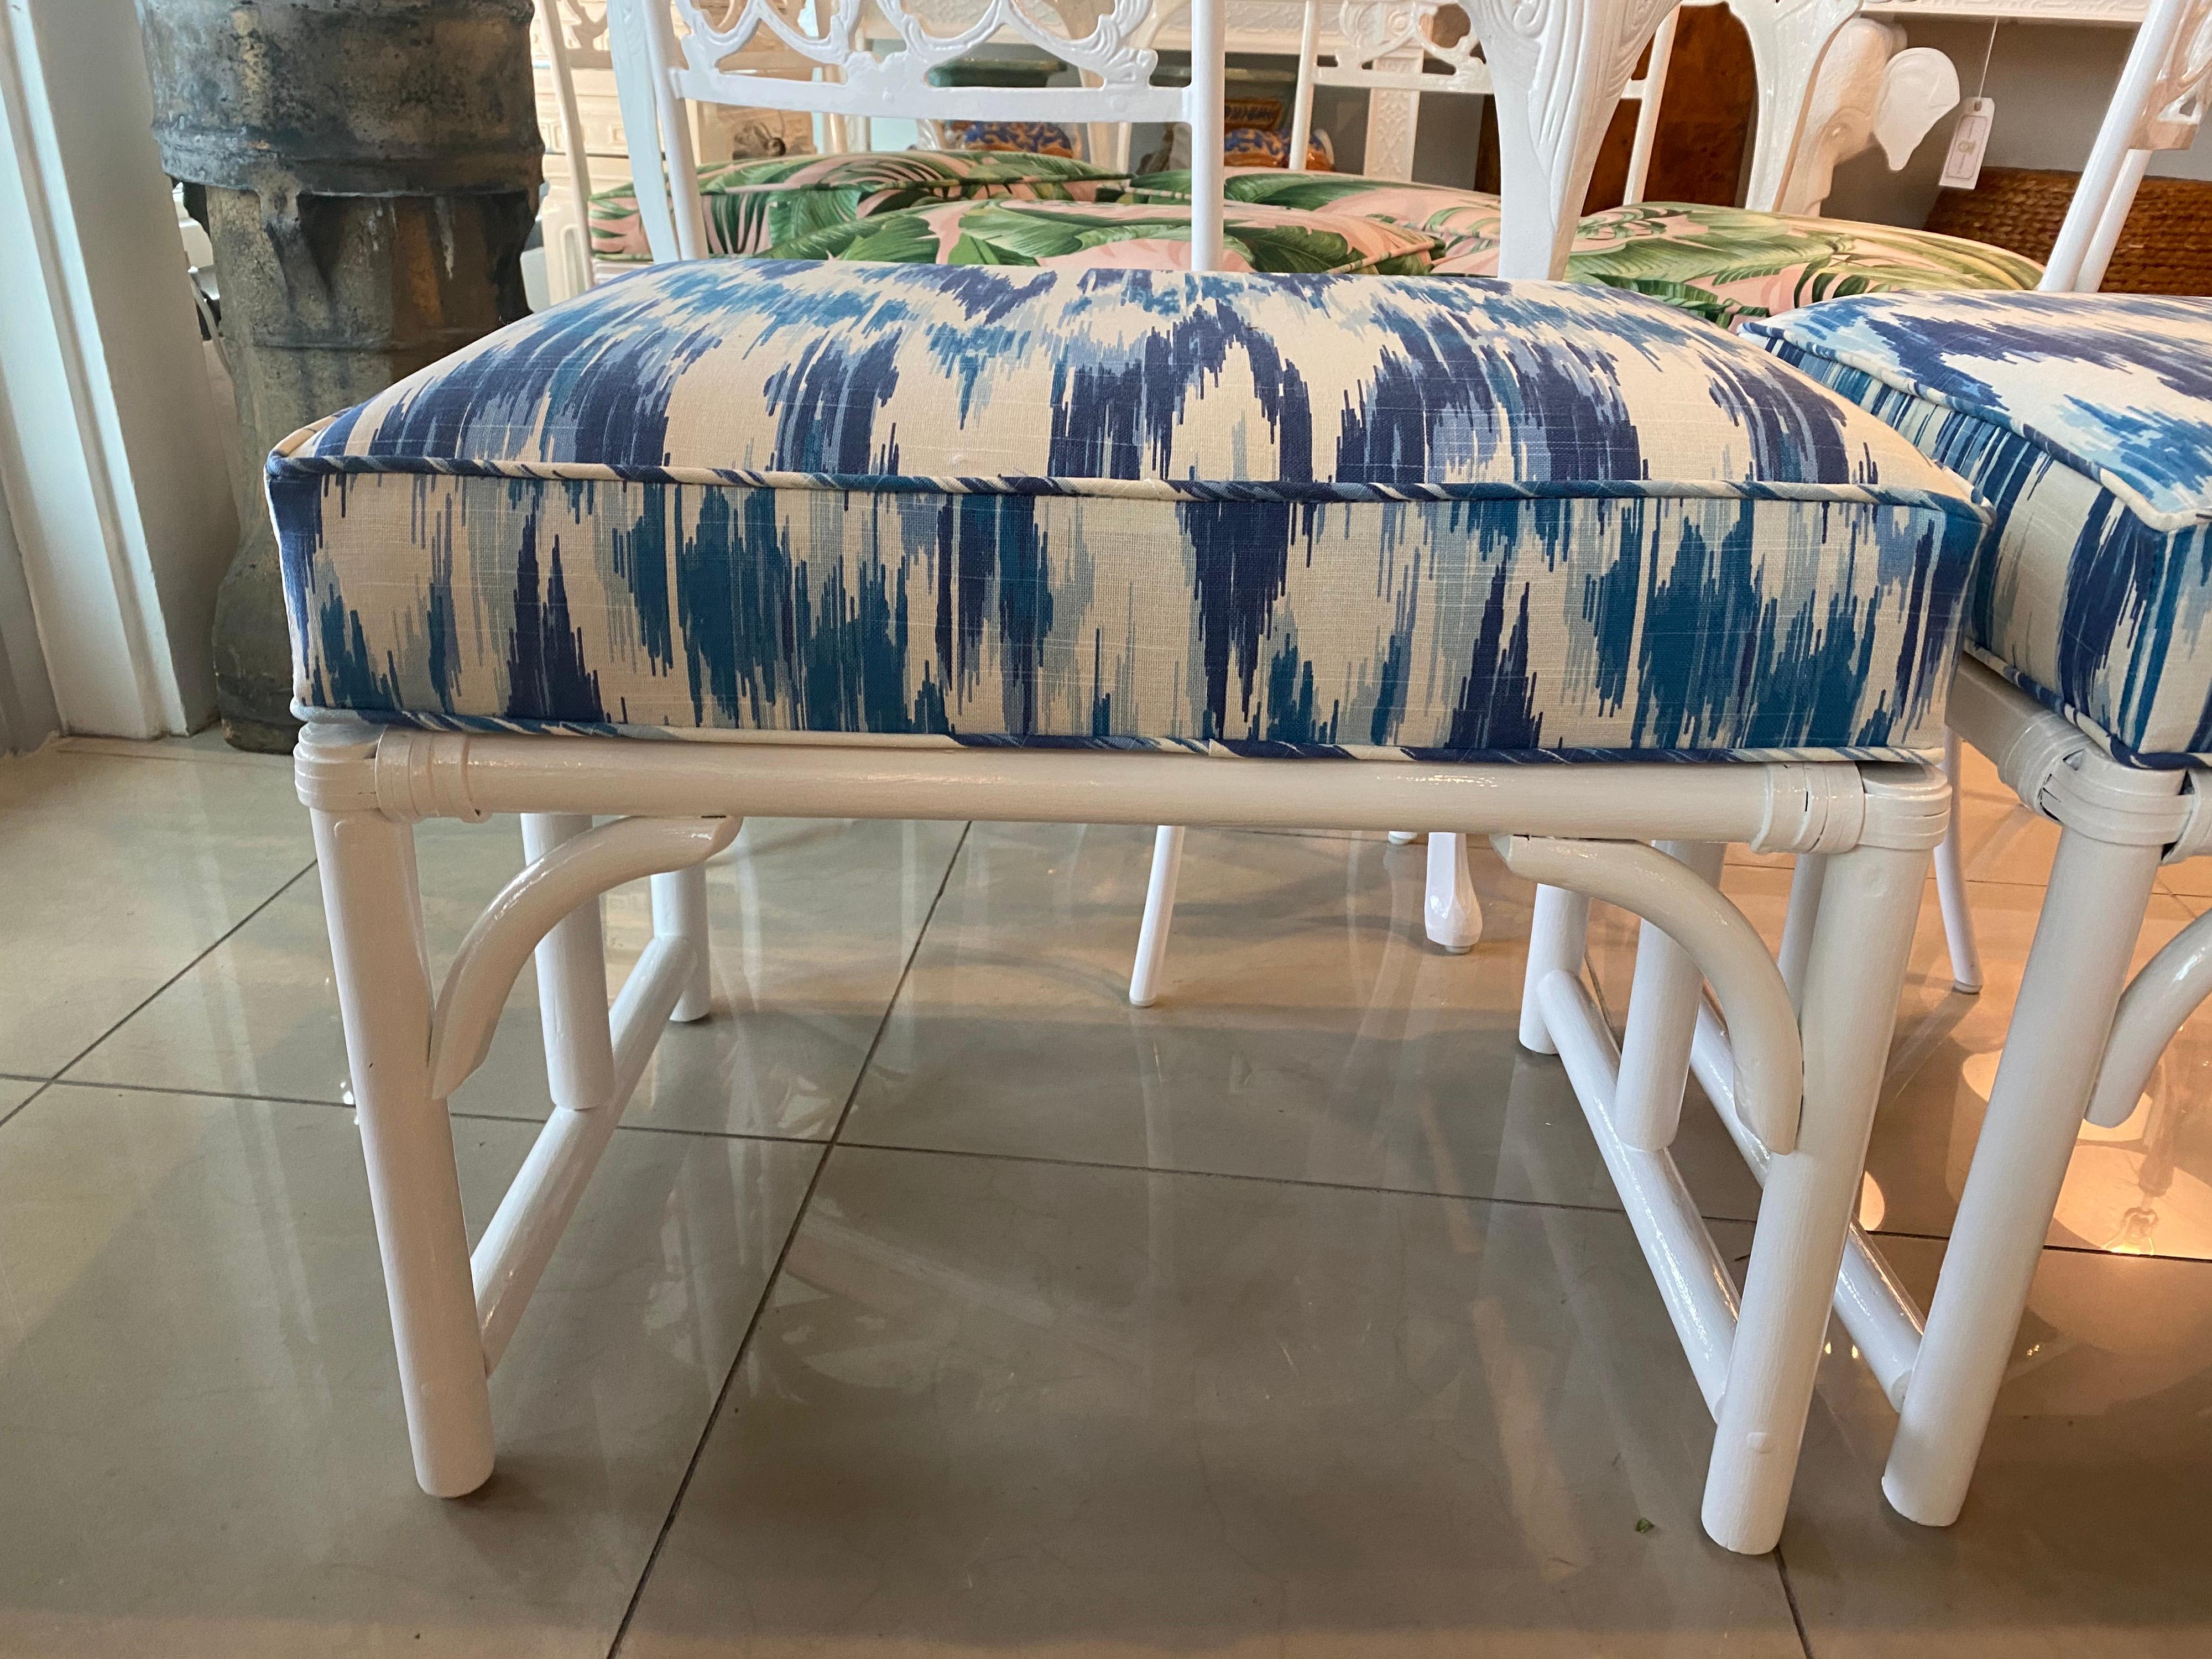 Beautiful pair of vintage rattan bamboo stools benches ottomans. These have been newly lacquered white gloss. Newly upholstered blue and white fabric with all new insides, foam as well.